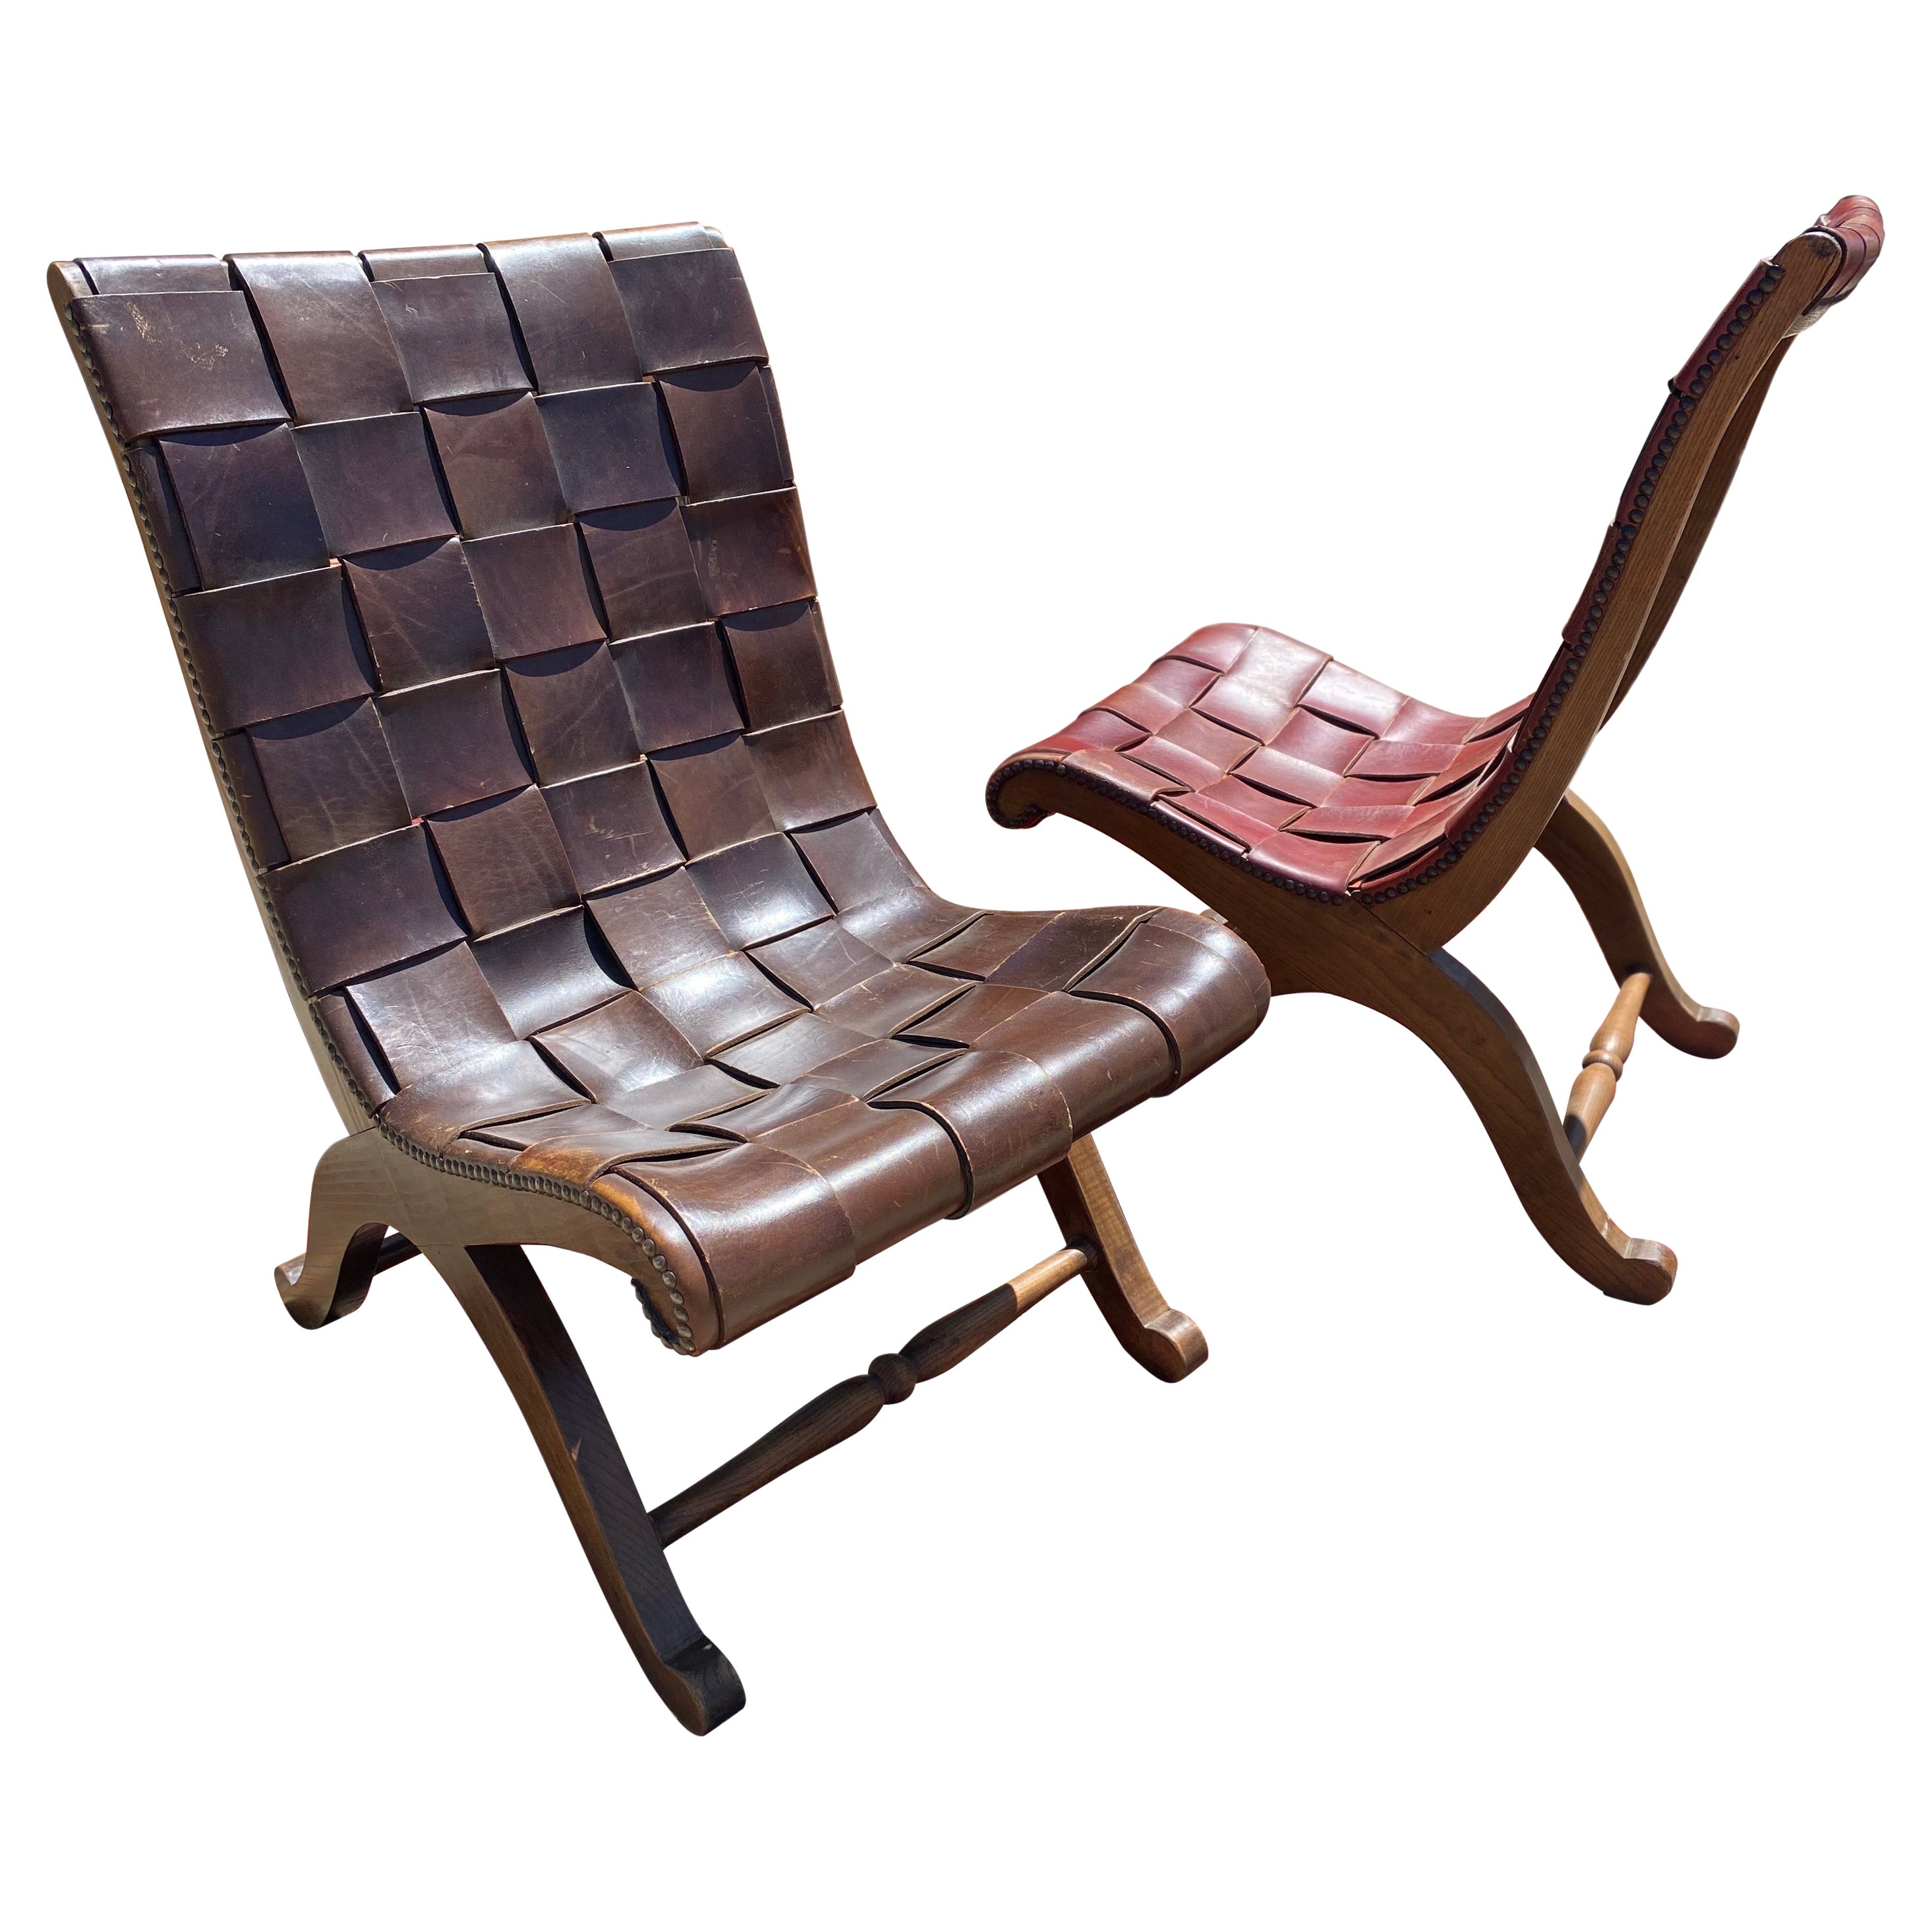 Leather Pierre Lottier Slipper Chairs, Spain, Circa 1950s For Sale